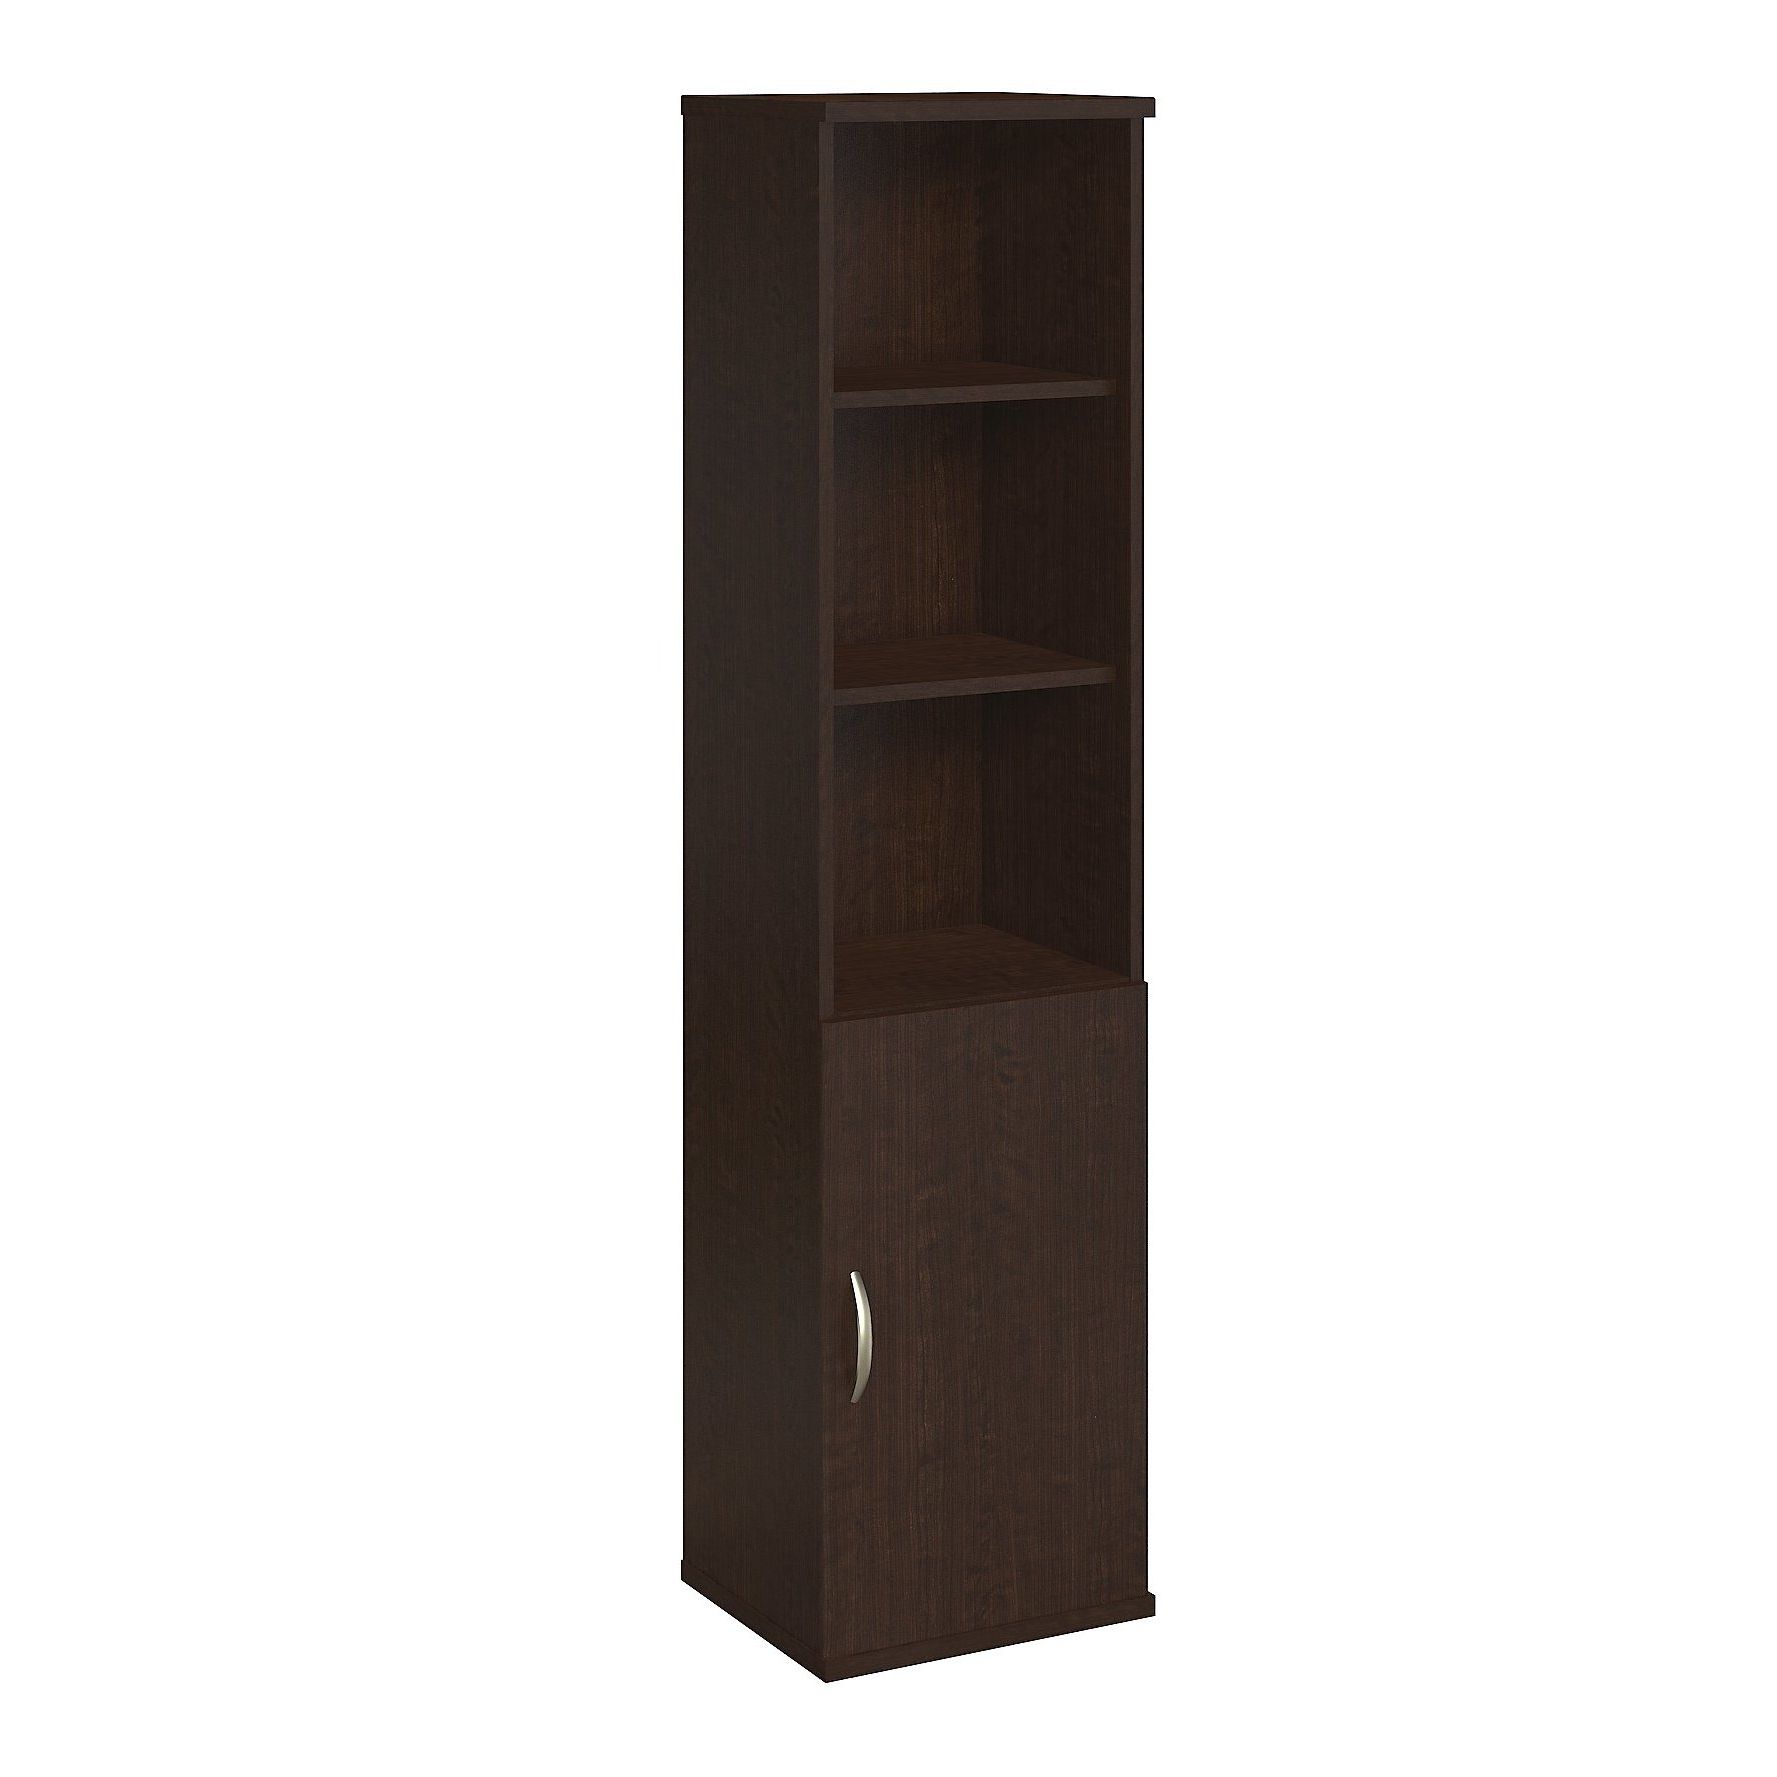 Series C Standard Bookcases In Most Up To Date Series C Elite 5 Shelf Standard Bookcase (View 4 of 20)